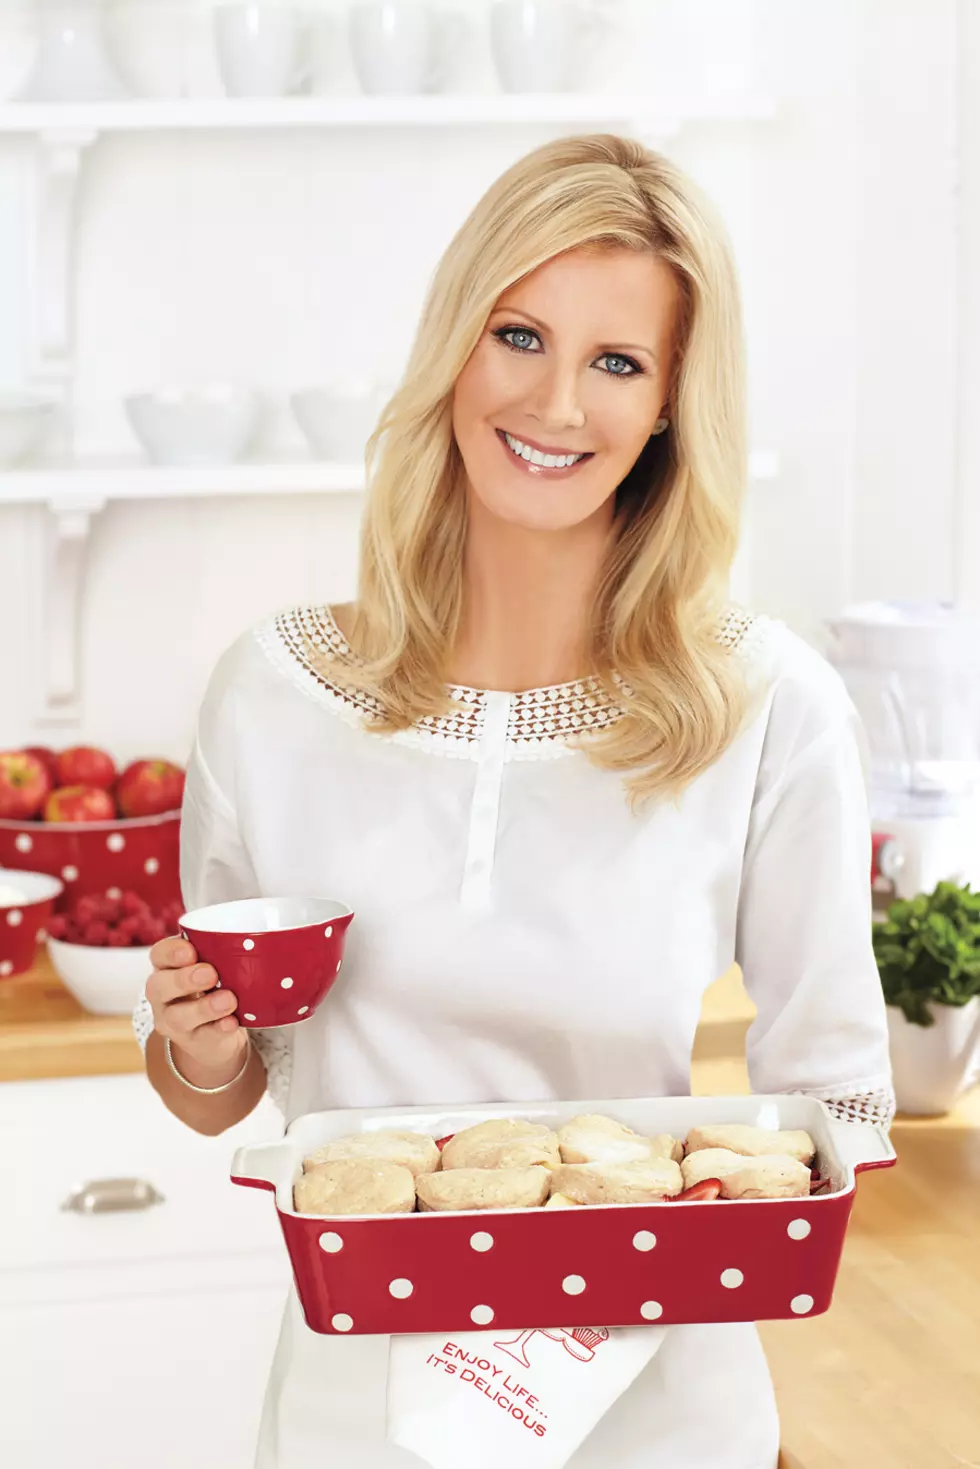 Food Network Celebrity Chef Sandra Lee on Buffalo's Growth, Butterlambs,  and An Easy Easter Ham